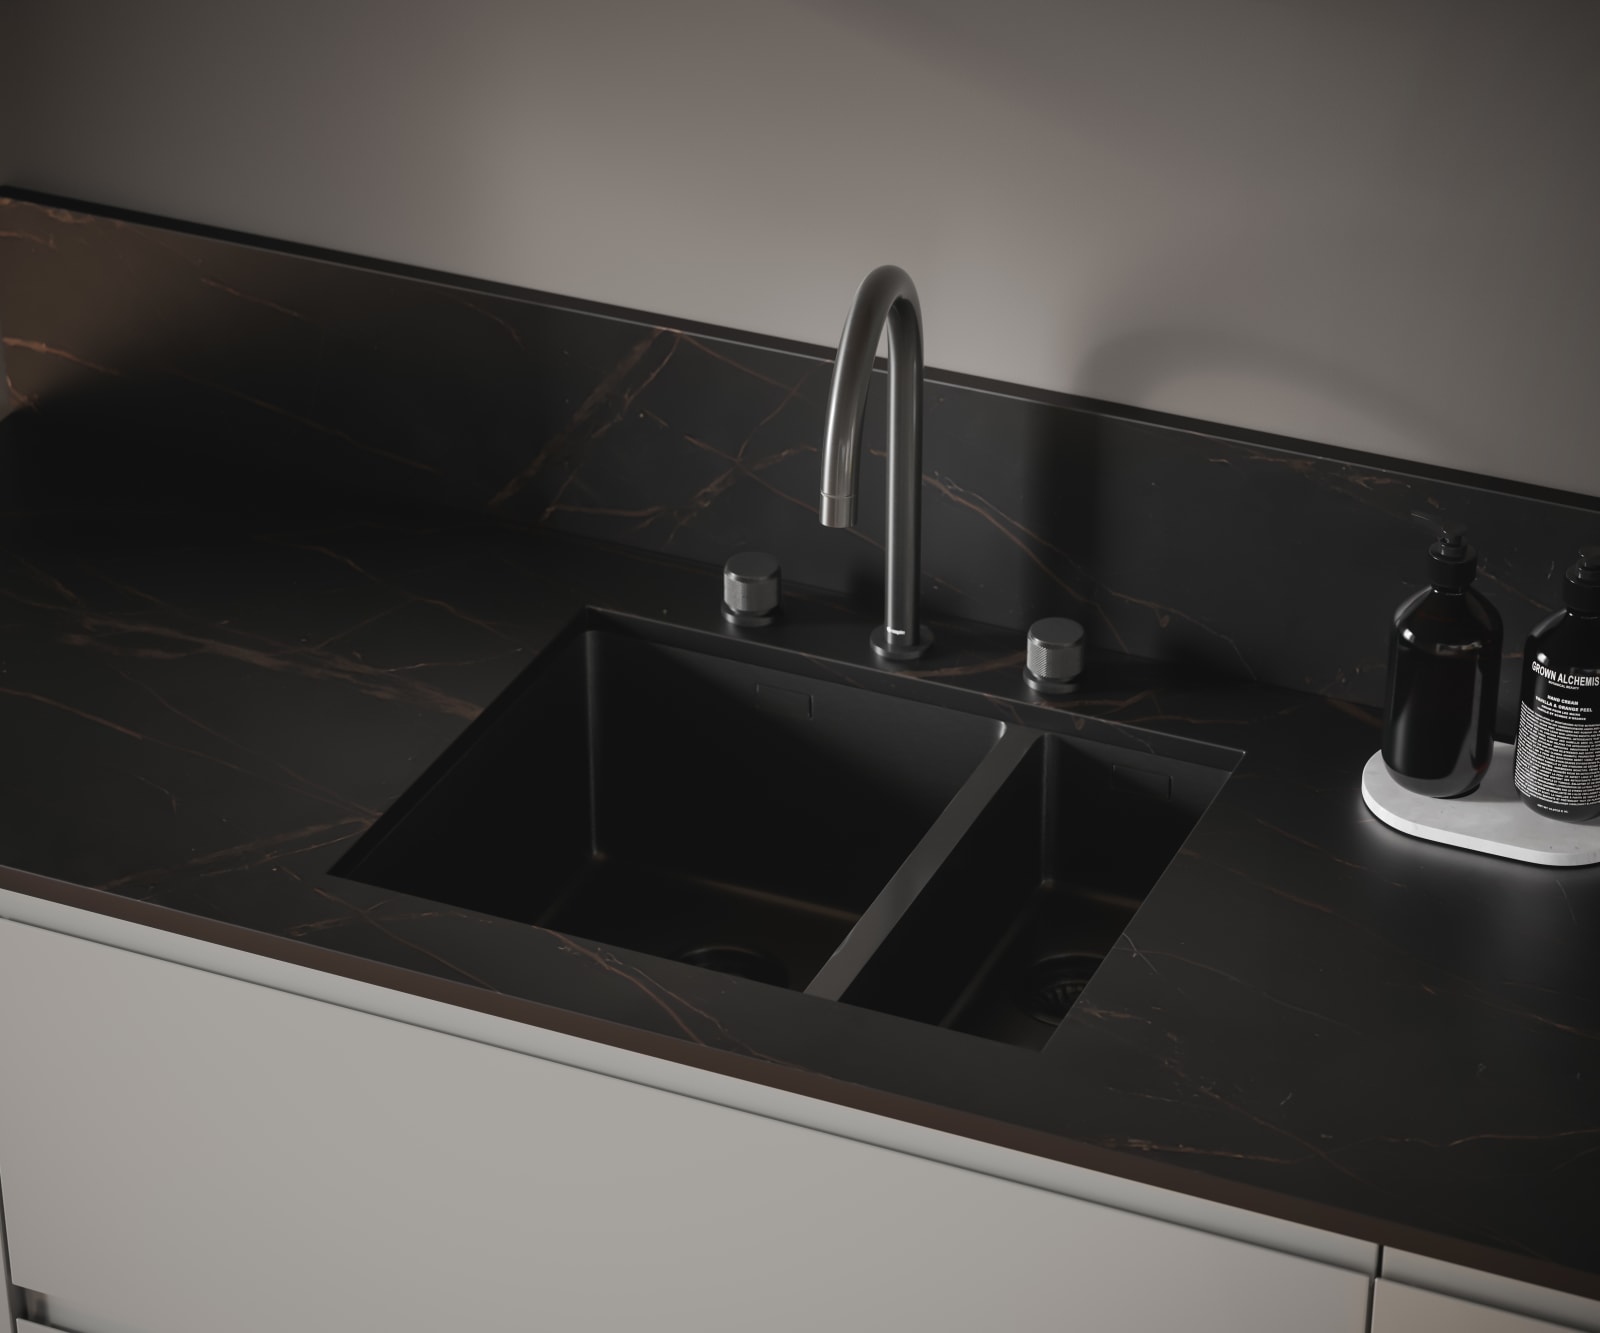 The J-pull handle of Magnet's Duxbury kitchen range is seen with a dark kitchen worktop and modern integrated double sink and arched tap.